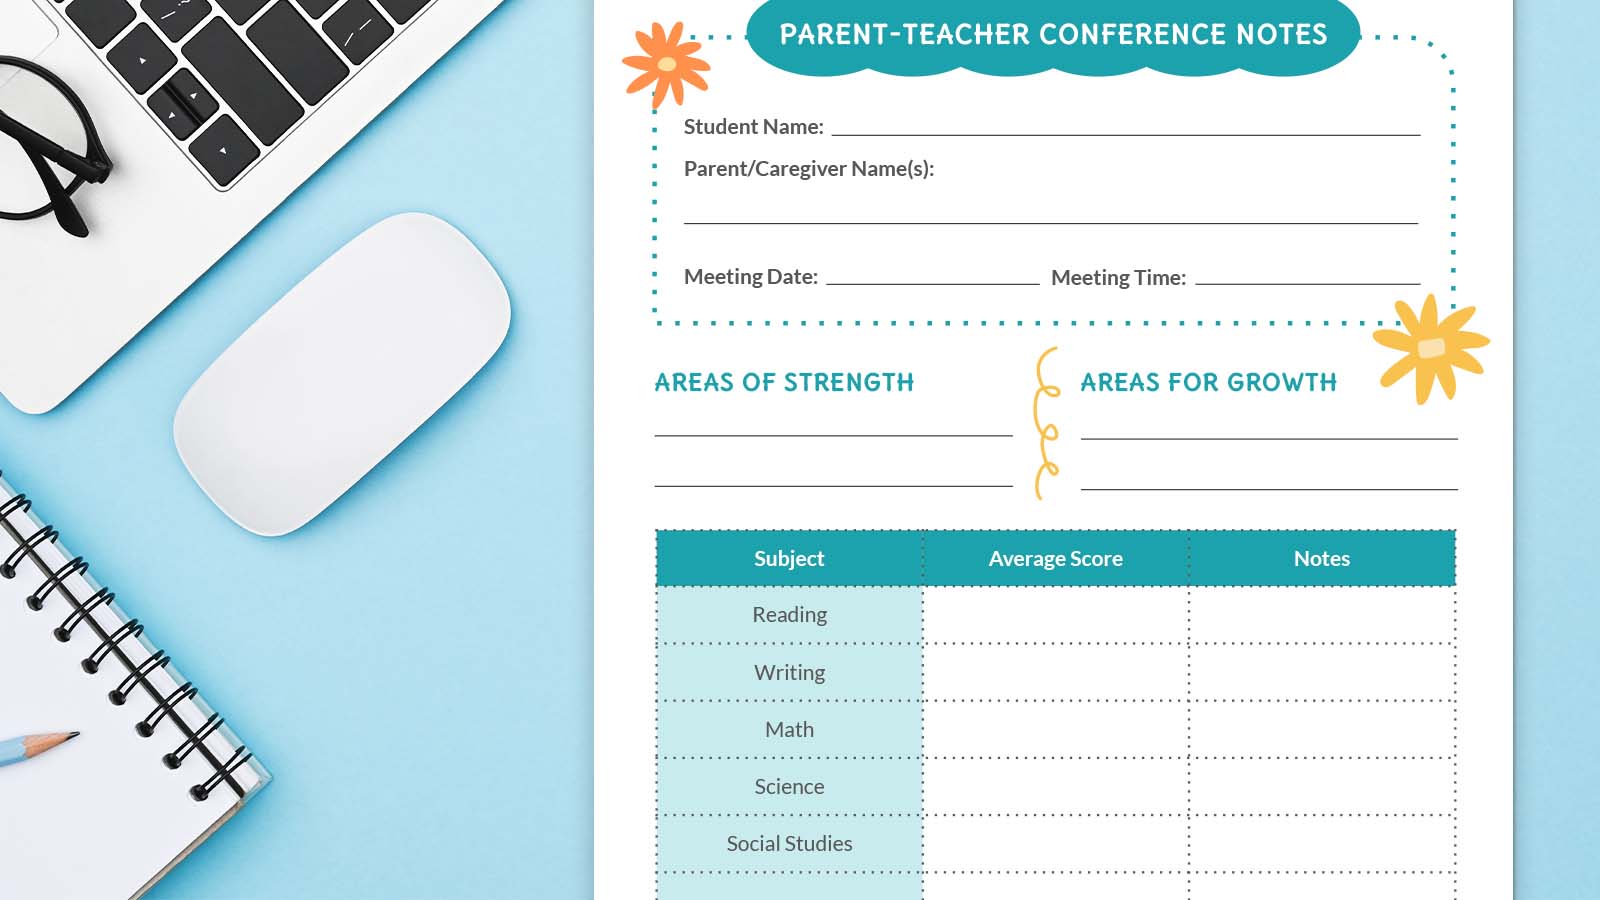 Parent-teacher conference form note on desk with mouse, laptop, and notebook.